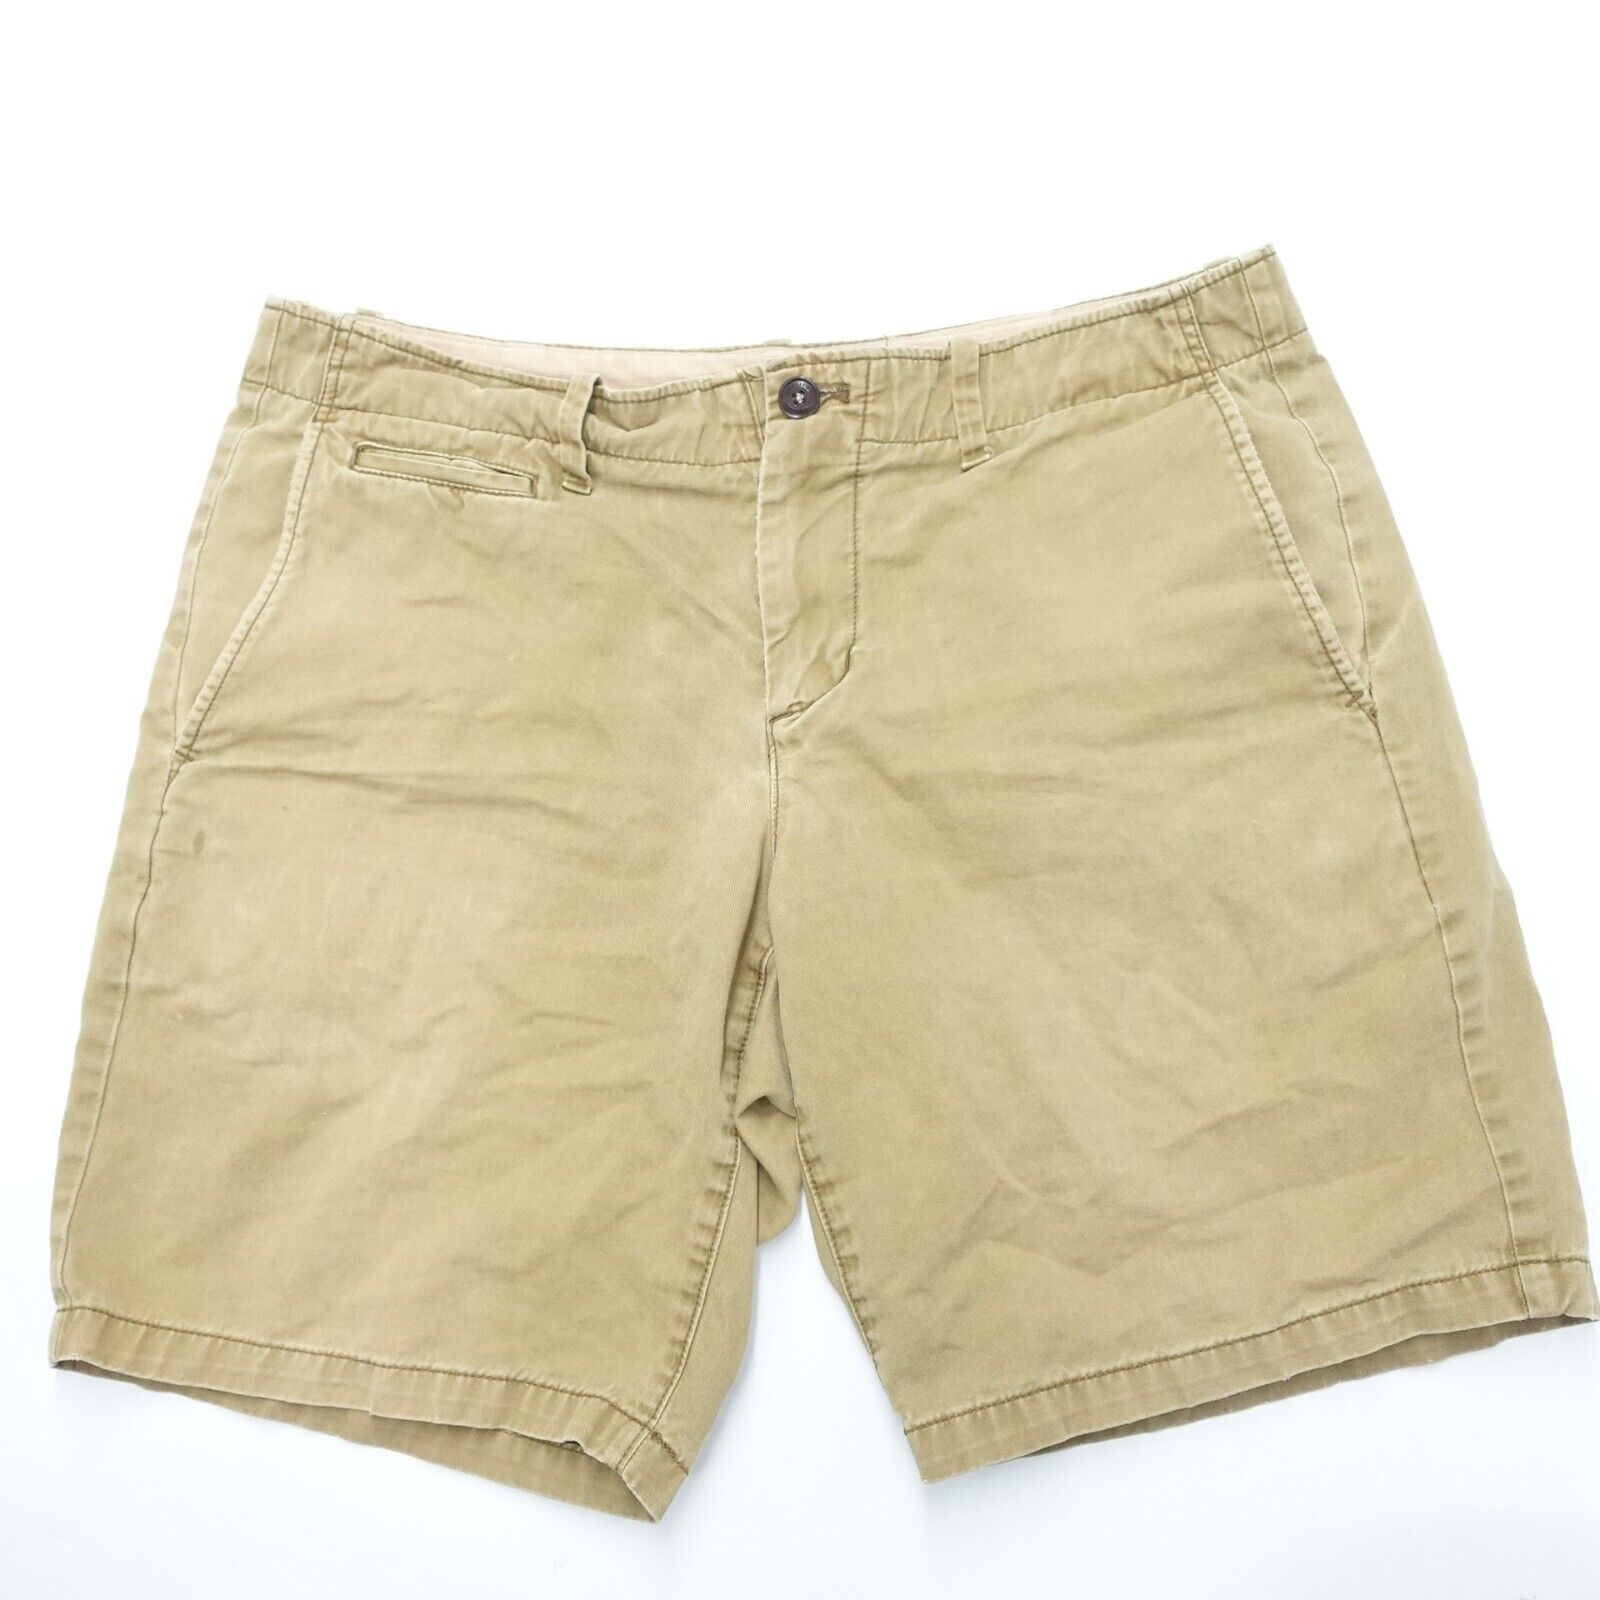 Gap Chino Shorts Men\'s 34W Tan Cotton Stretch Lived-in Relaxed Fit Slash Pockets